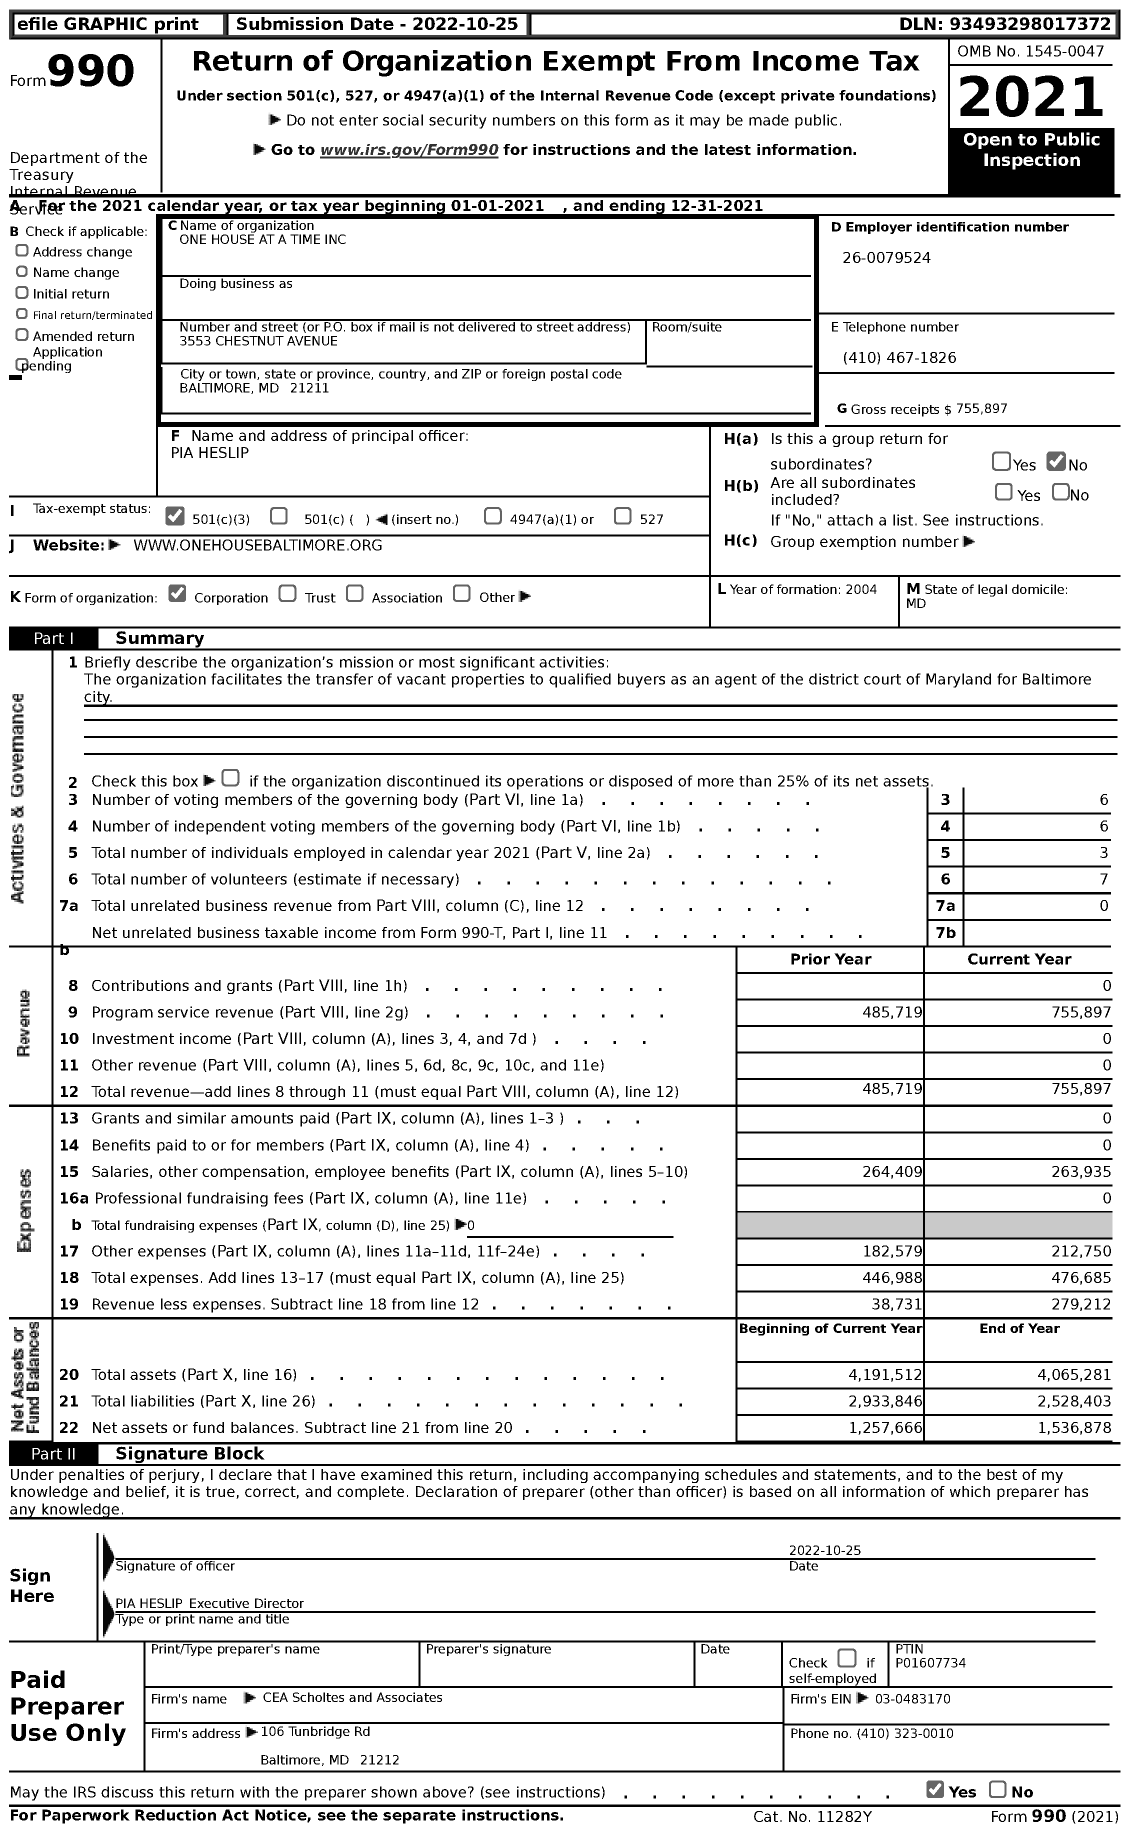 Image of first page of 2021 Form 990 for One House at a Time